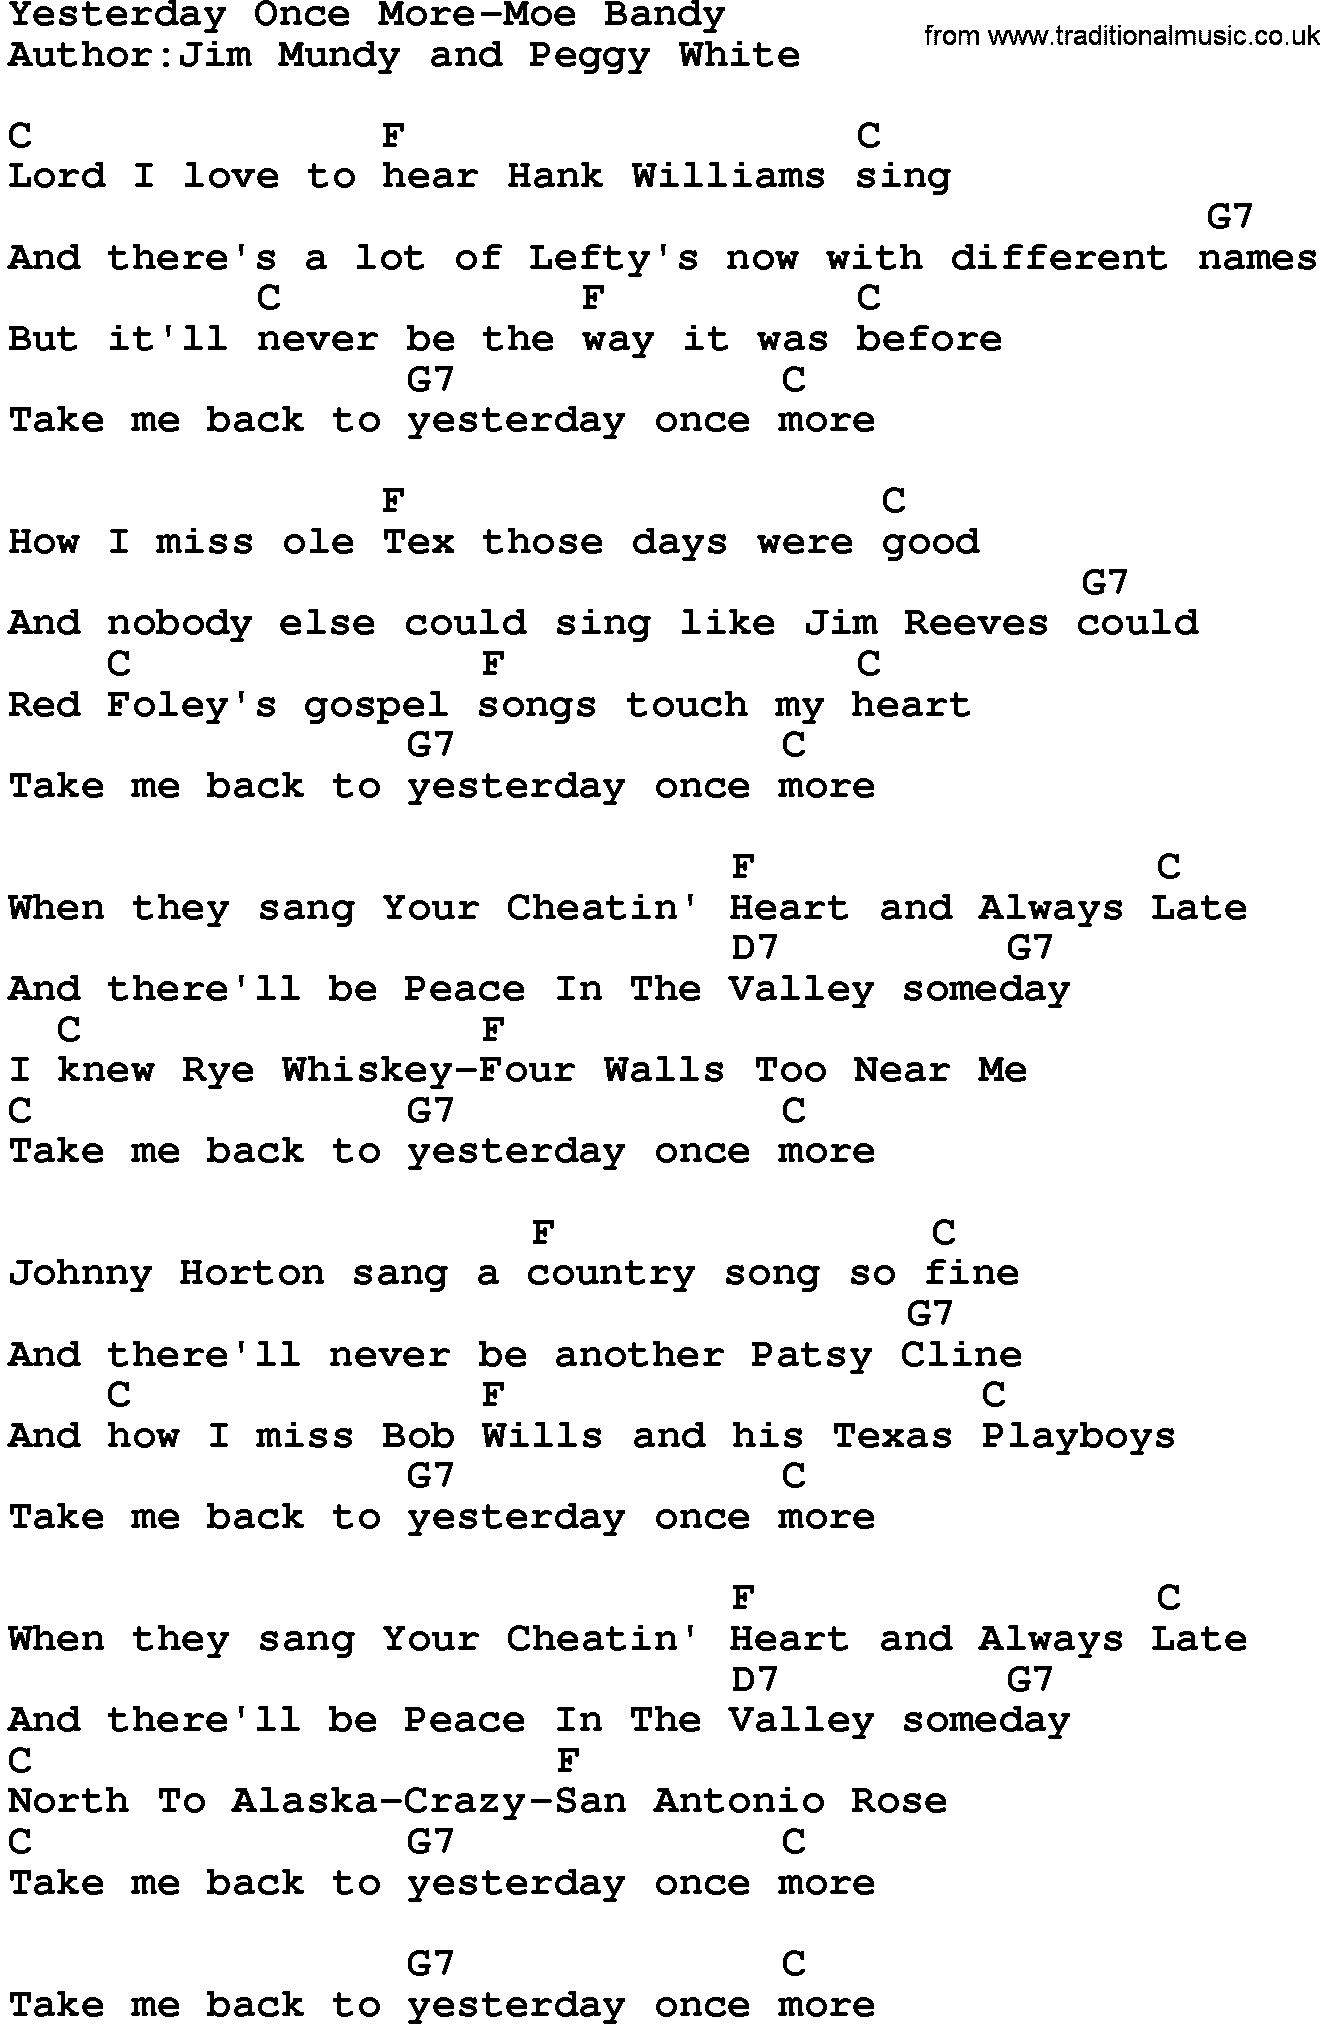 Country Music Yesterday Once More Moe Bandy Lyrics And Chords